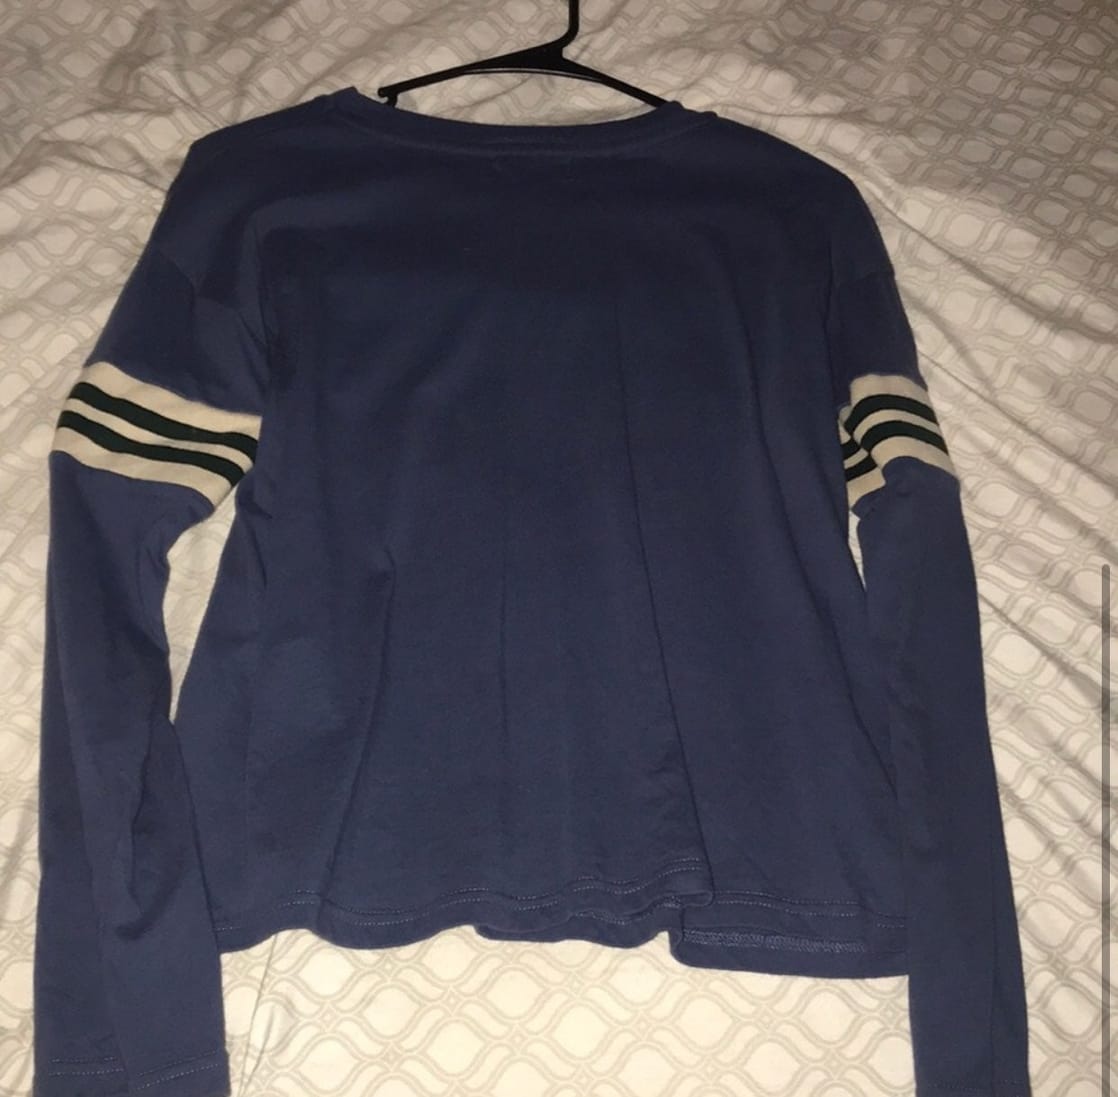 Urban Outfitters XS Long Sleeve Shirt